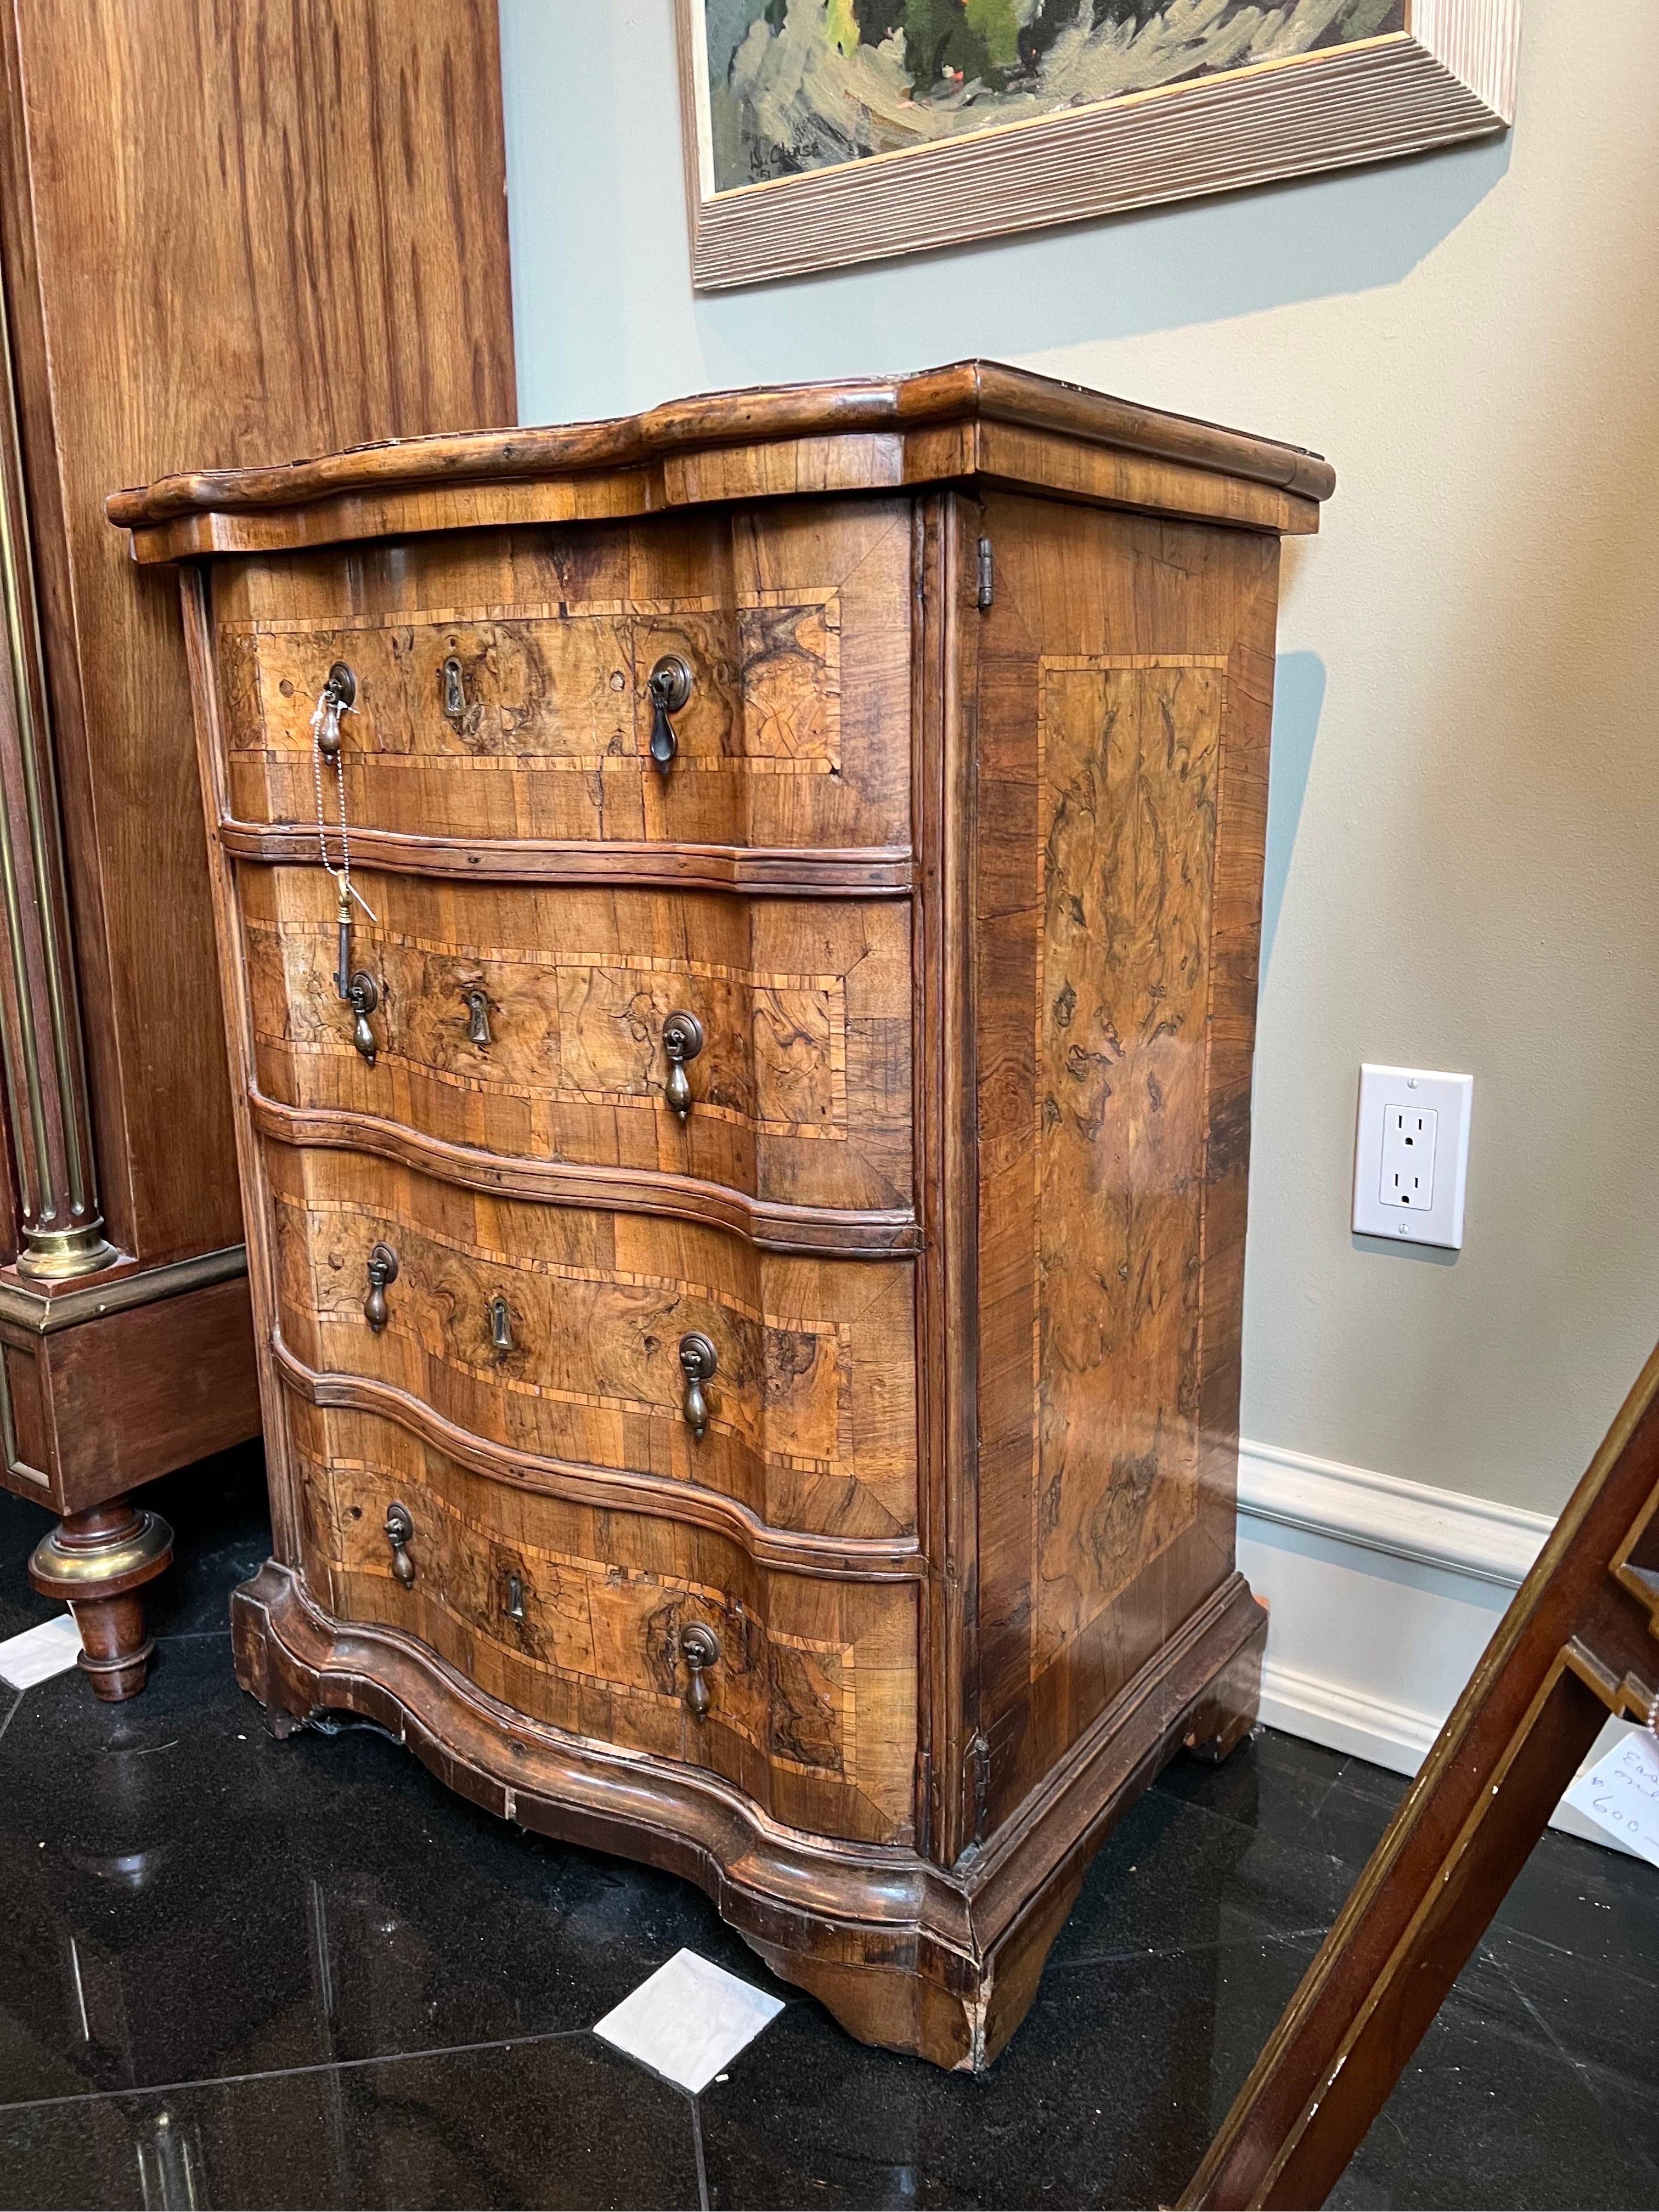 This is a fabulous antique Baroque set, made in Italy, circa 1750s. It has been made from The finest burl walnut with walnut crossbanding and bowwood inlaid lines. One table has dovetailed drawers and other include shelves. It has its original